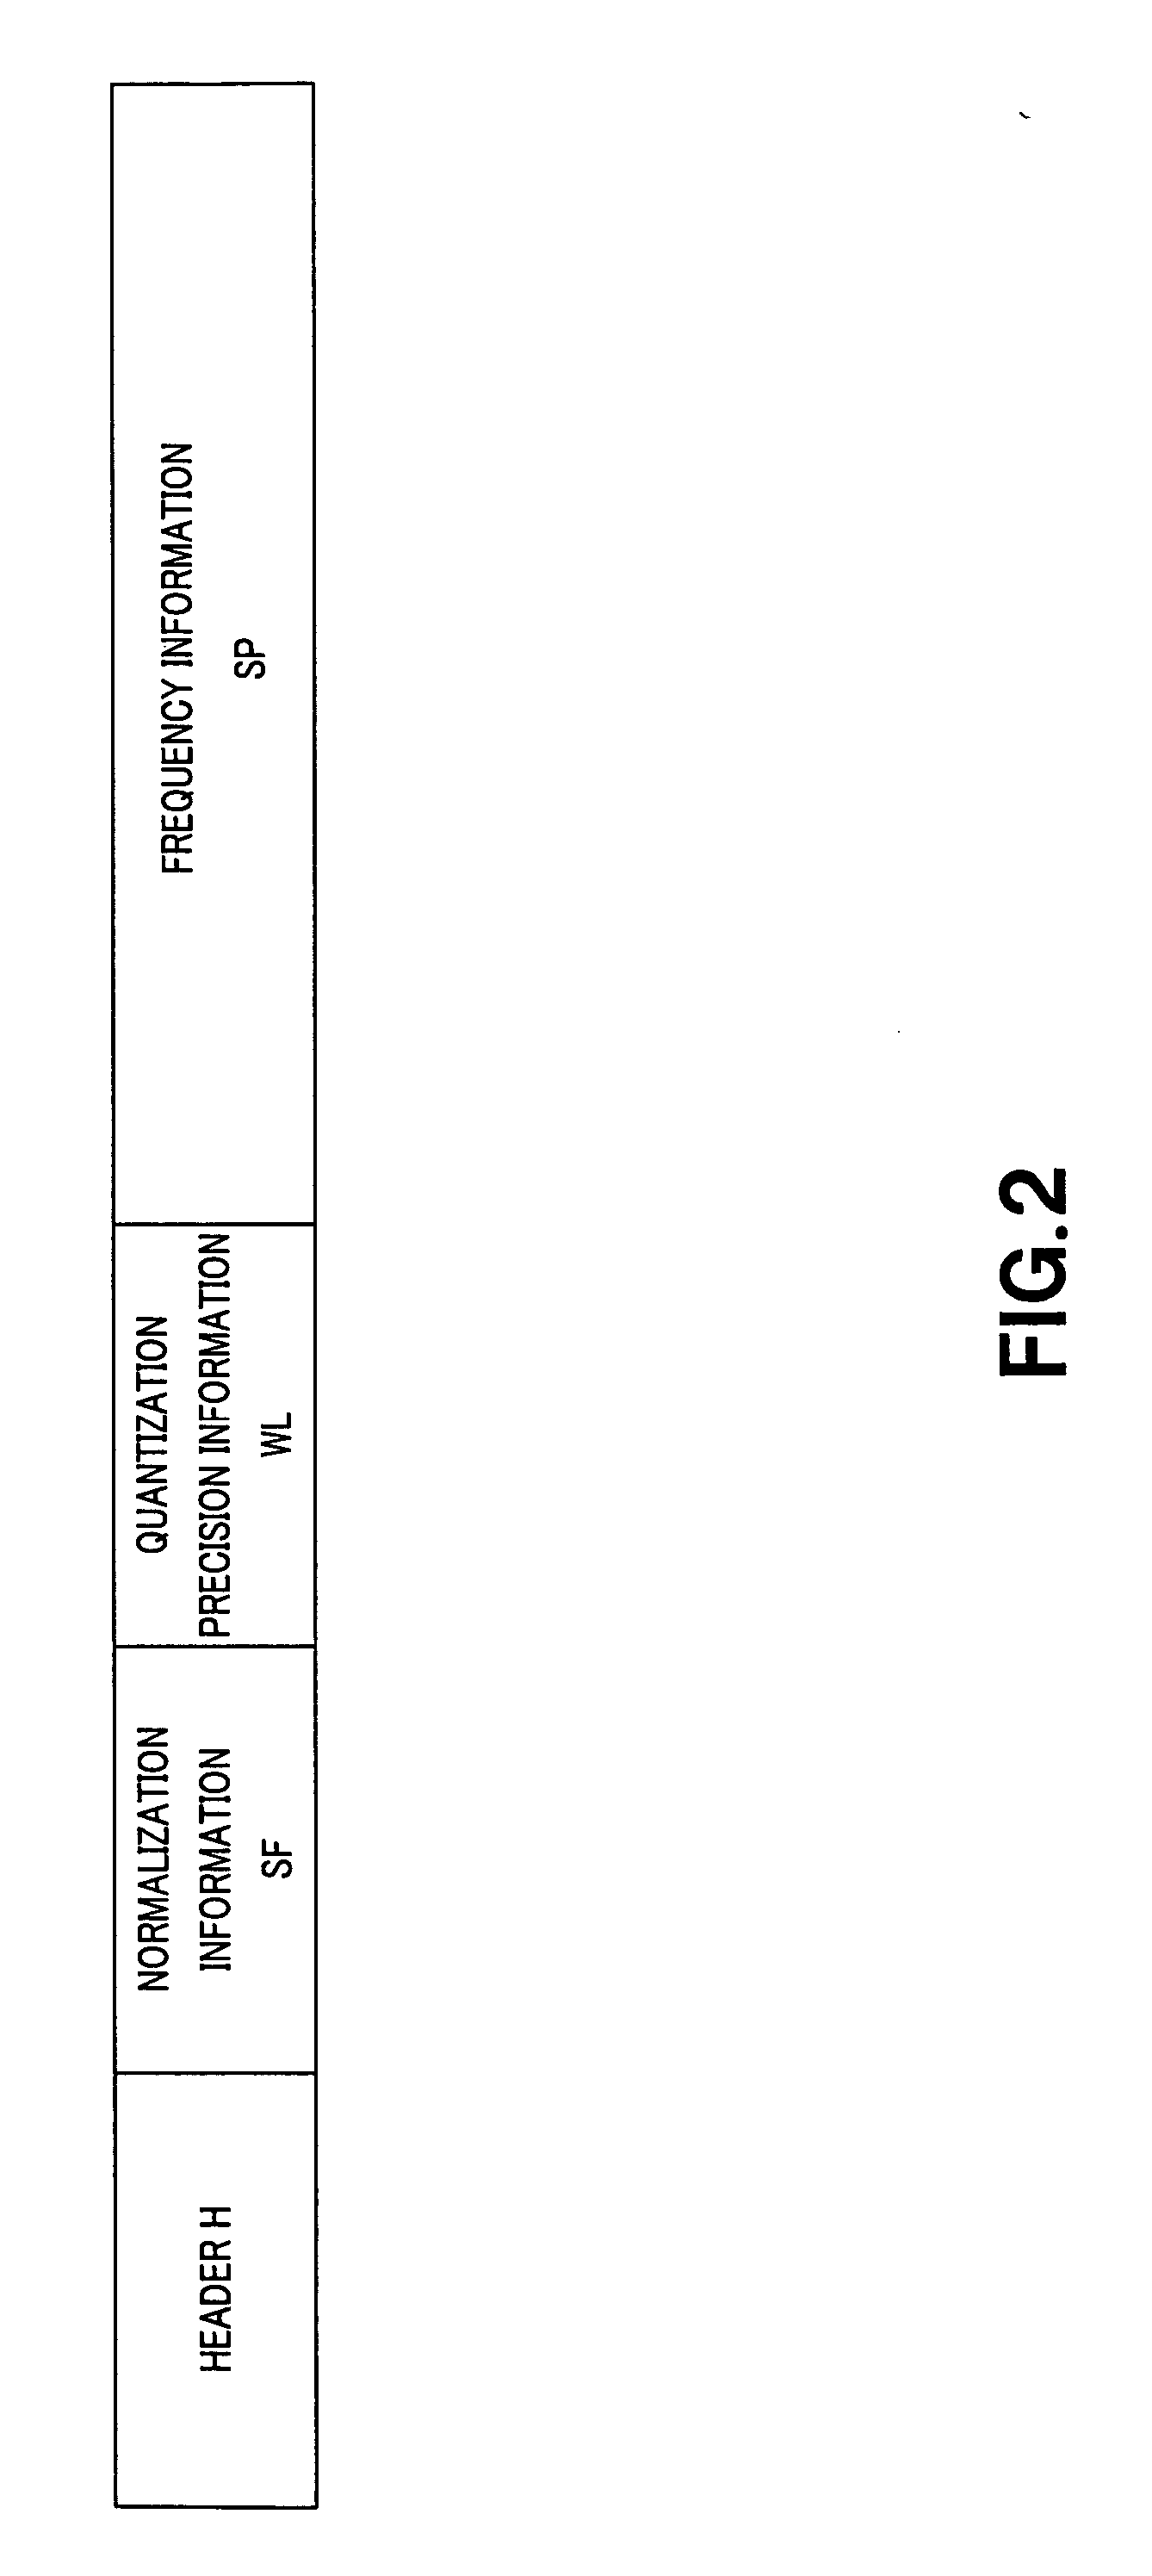 Music information encoding device and method, and music information decoding device and method